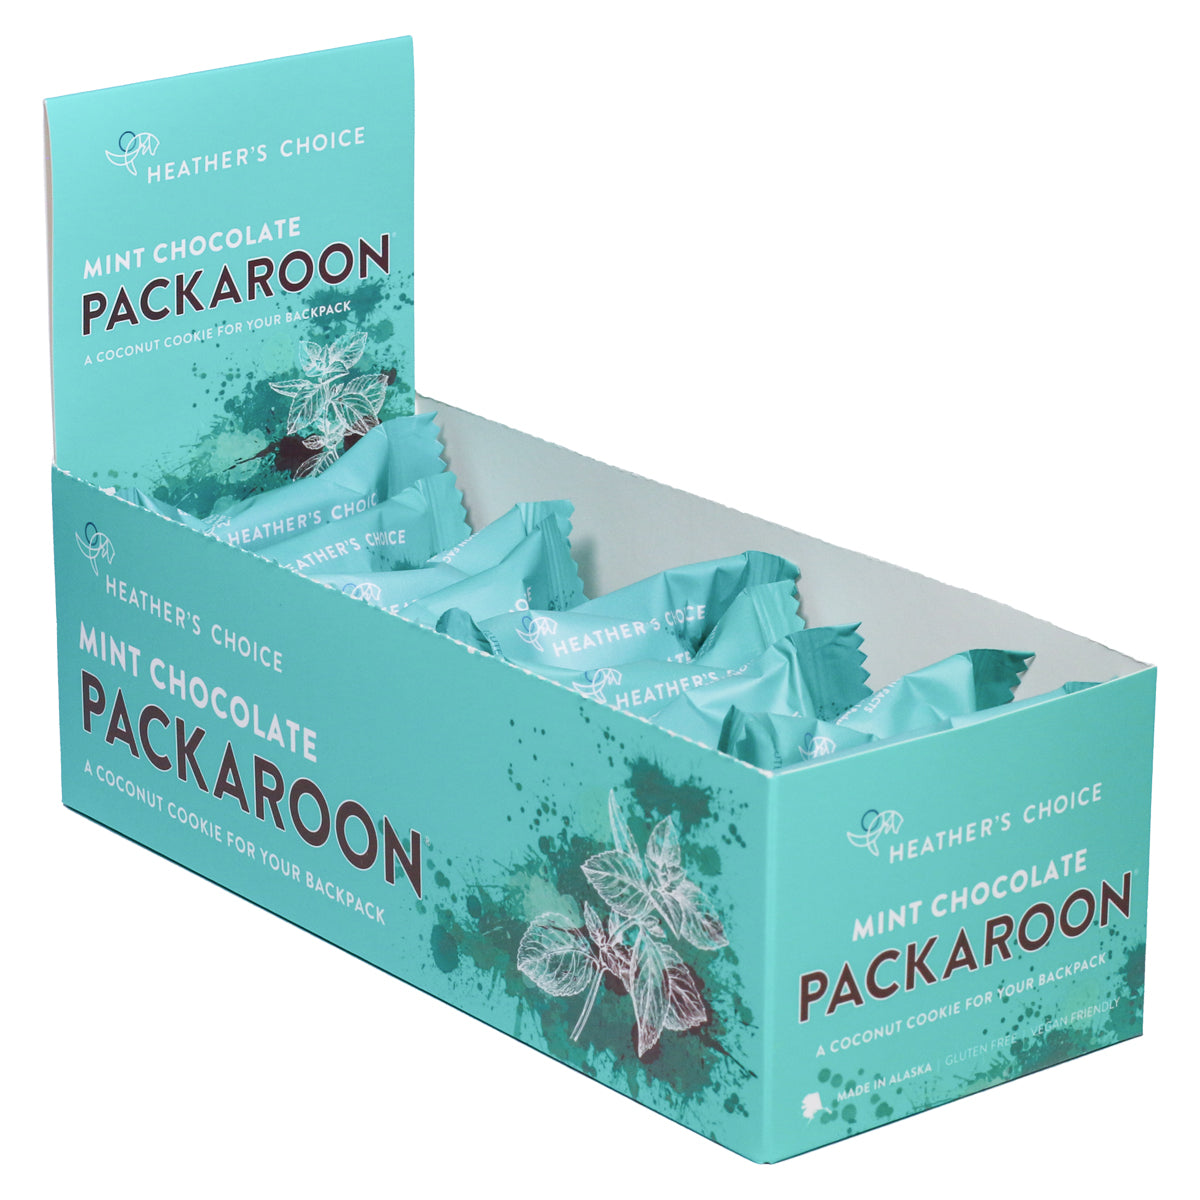 Heather's Choice Packaroons in Mint Chocolate by GOHUNT | Heather's Choice - GOHUNT Shop